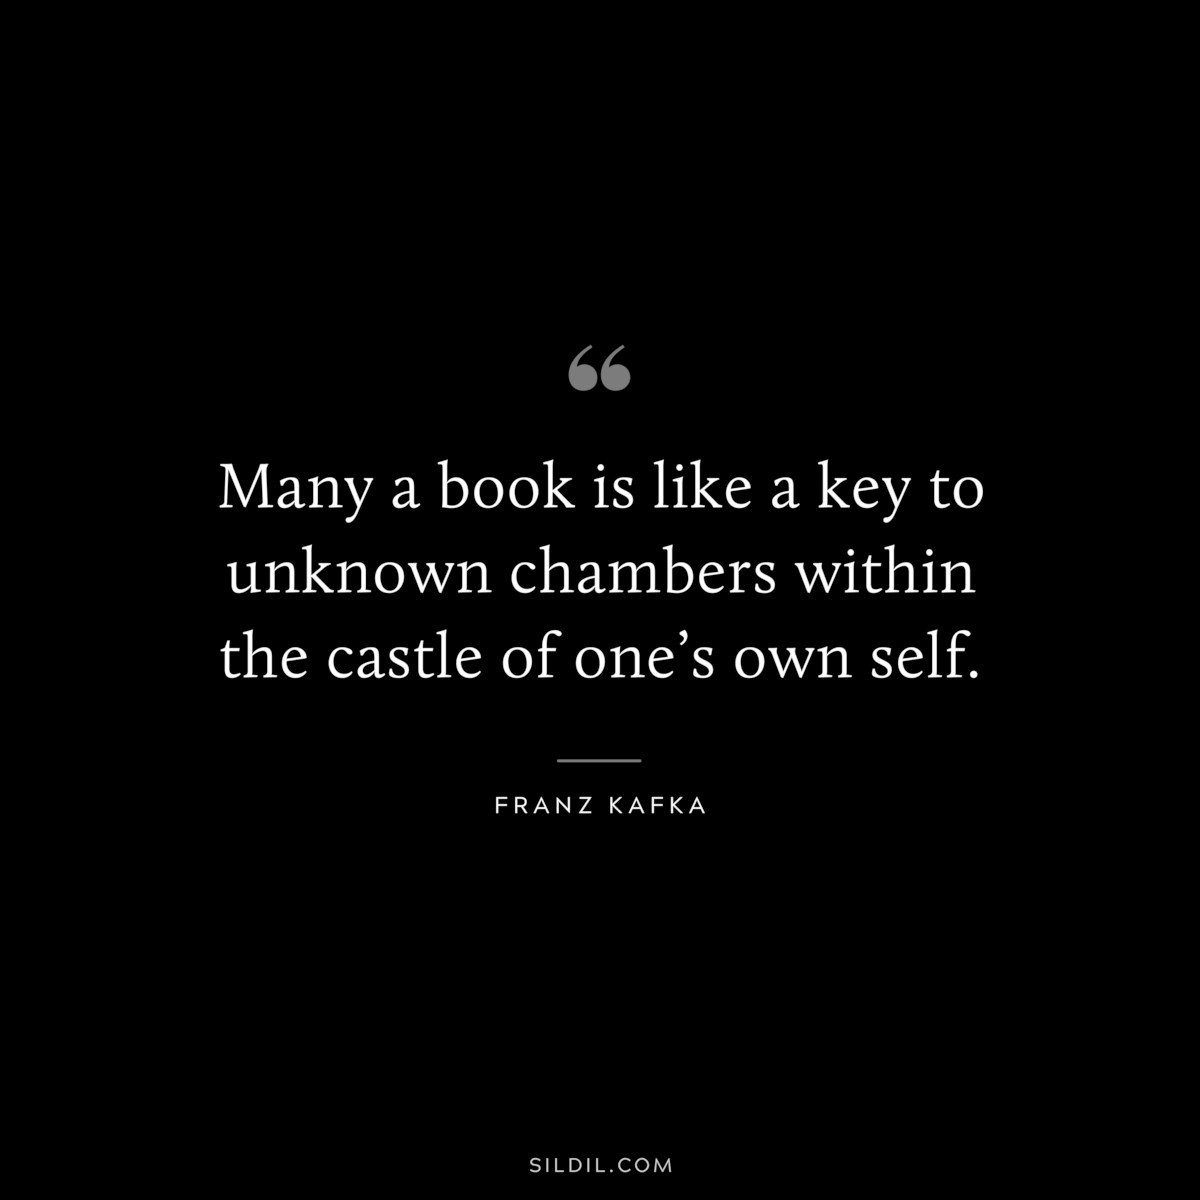 Many a book is like a key to unknown chambers within the castle of one’s own self. ― Franz Kafka